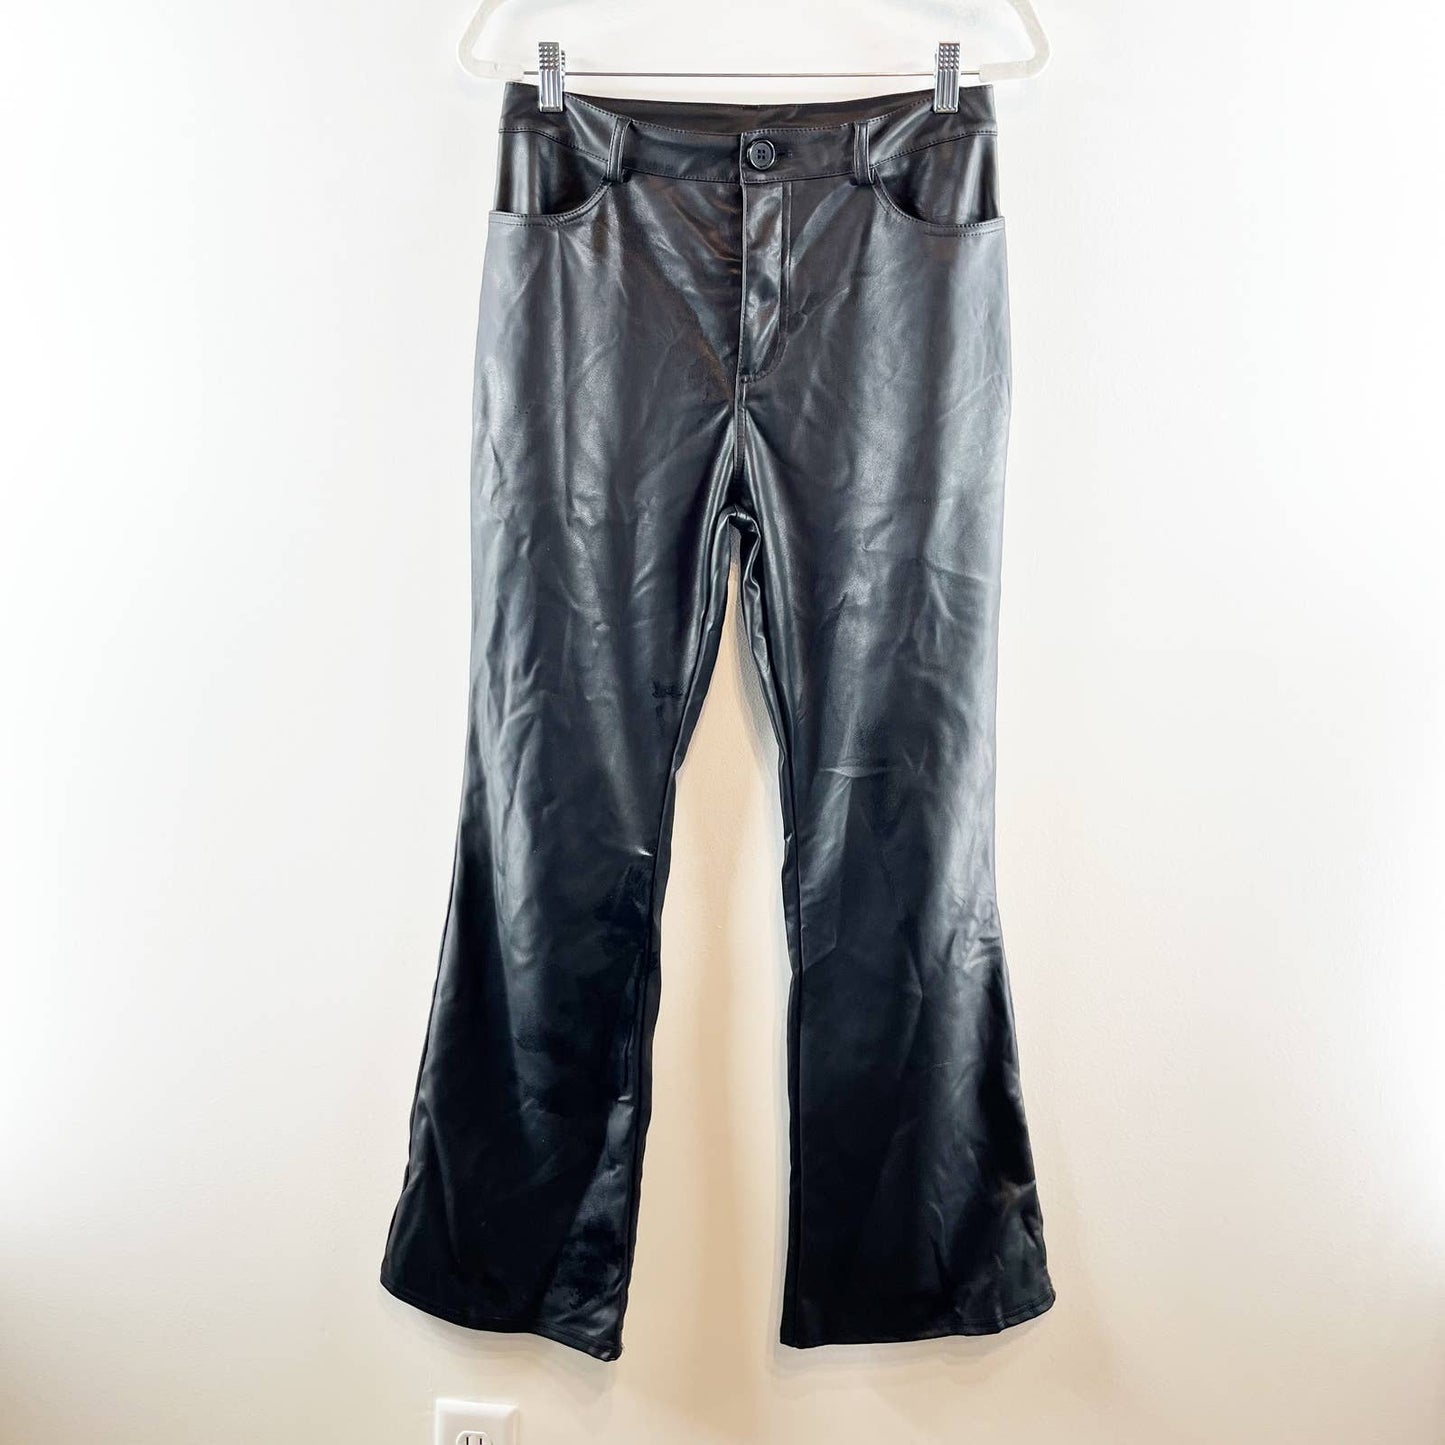 Le Lis Collection Faux Leather Pull On High Waisted Bootcut Flare Pants Black M